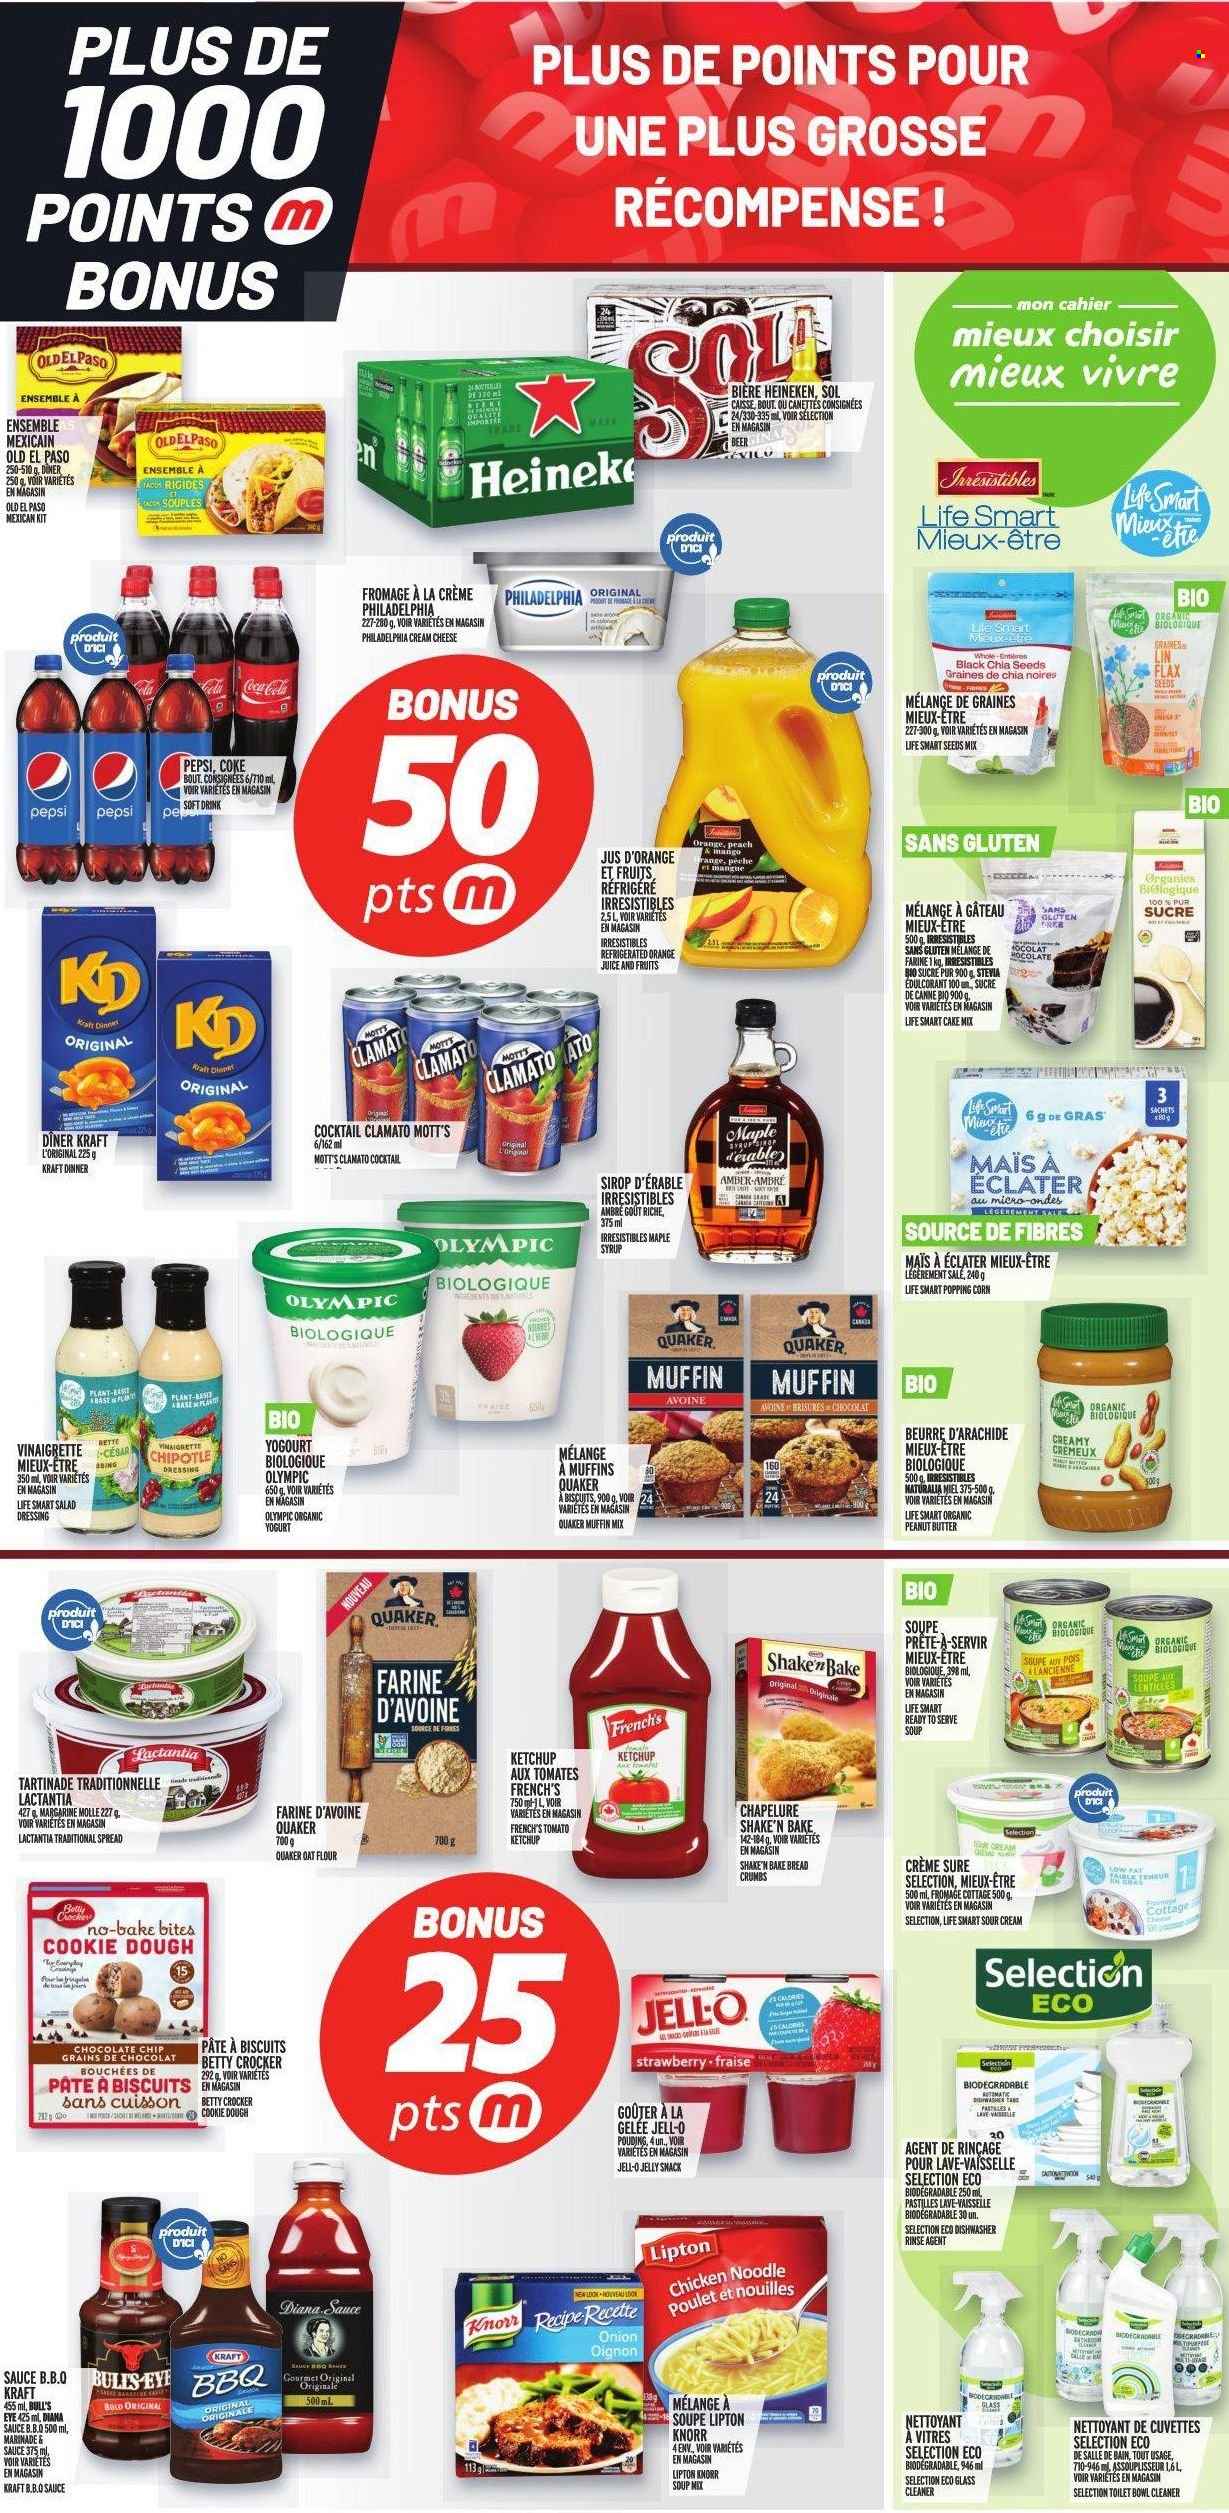 thumbnail - Metro Flyer - January 06, 2022 - January 12, 2022 - Sales products - Old El Paso, tacos, cake mix, muffin mix, corn, Mott's, soup mix, soup, Quaker, noodles, Kraft®, cream cheese, yoghurt, organic yoghurt, shake, margarine, sour cream, cookie dough, chocolate chips, snack, jelly, biscuit, pastilles, oats, Jell-O, stevia, chia seeds, BBQ sauce, salad dressing, vinaigrette dressing, dressing, marinade, maple syrup, peanut butter, syrup, Coca-Cola, Pepsi, orange juice, juice, Clamato, soft drink, beer, Heineken, cleaner, glass cleaner, Sure, Knorr, ketchup, Philadelphia, Lipton. Page 2.